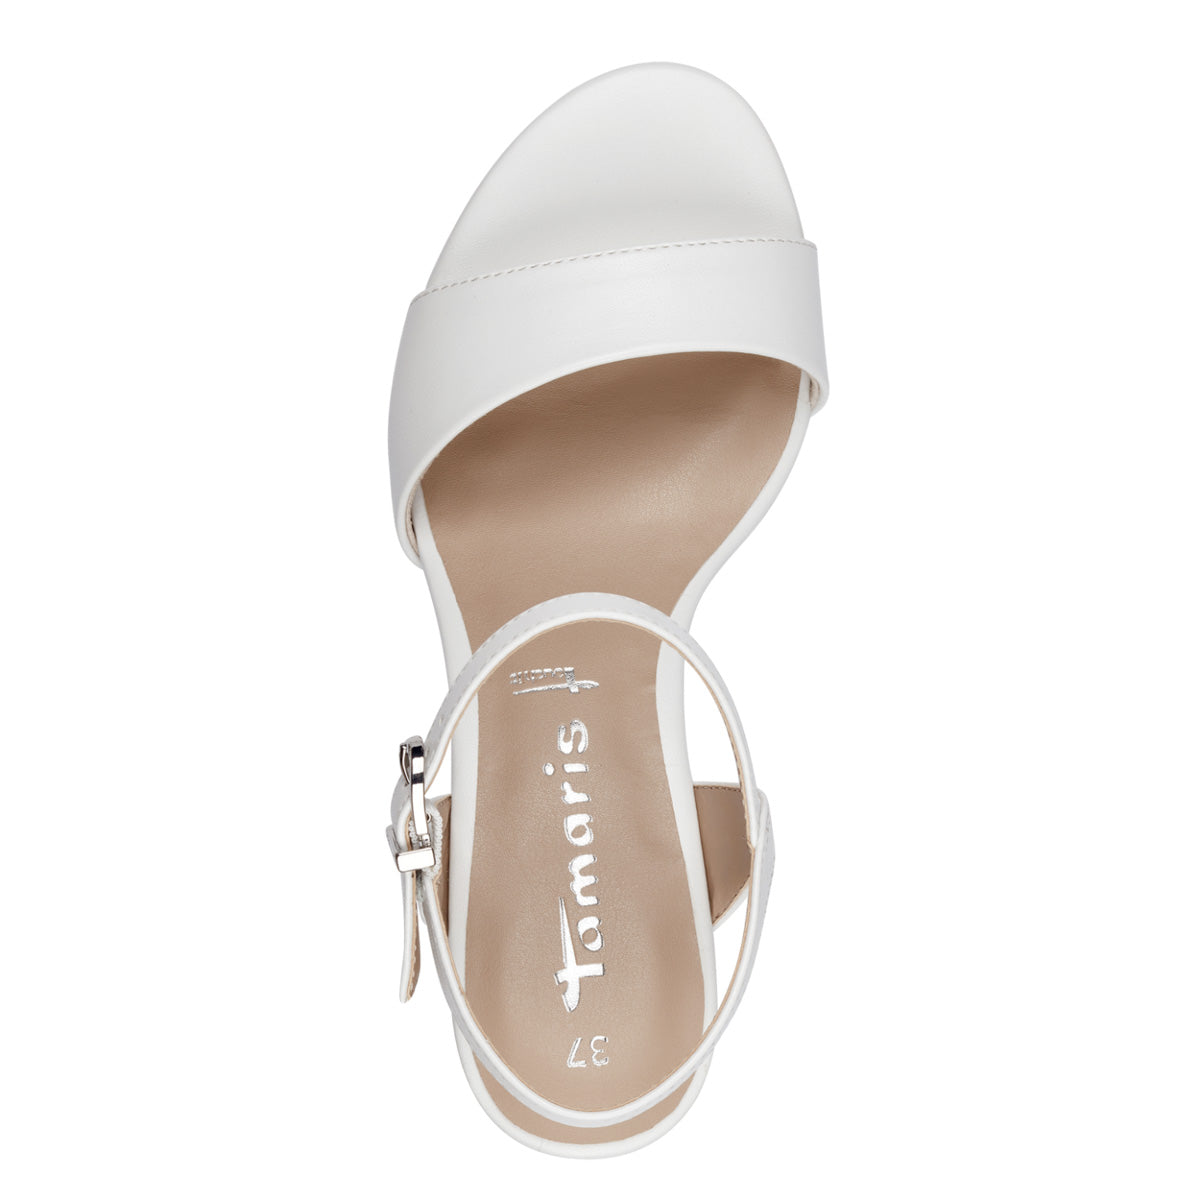  Top view showcasing the sleek design and adjustable straps of the Tamaris white occasionwear sandal.